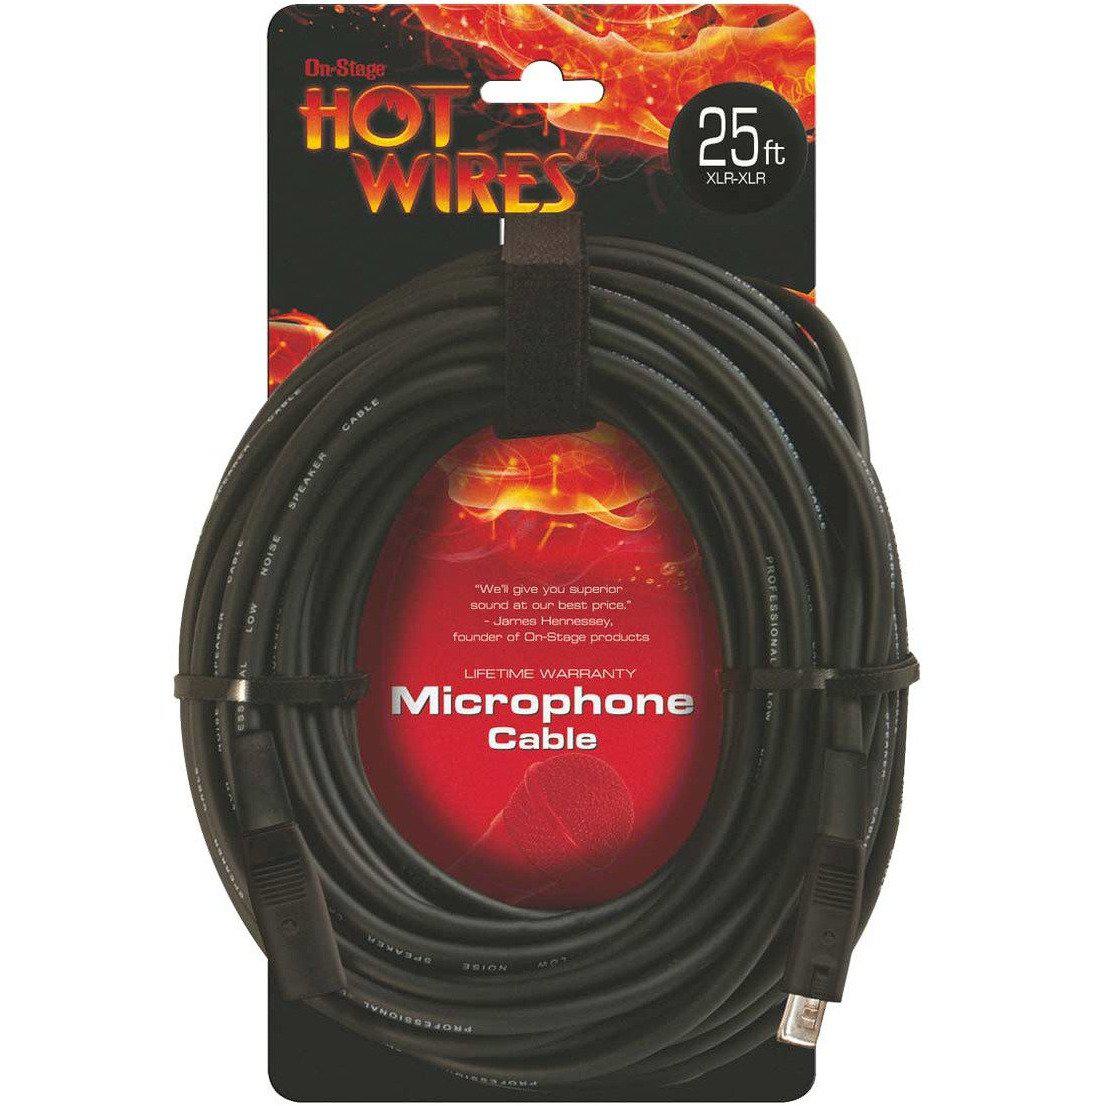 On-Stage Hot Wires Microphone Cables XLR-XLR-25'-Andy's Music